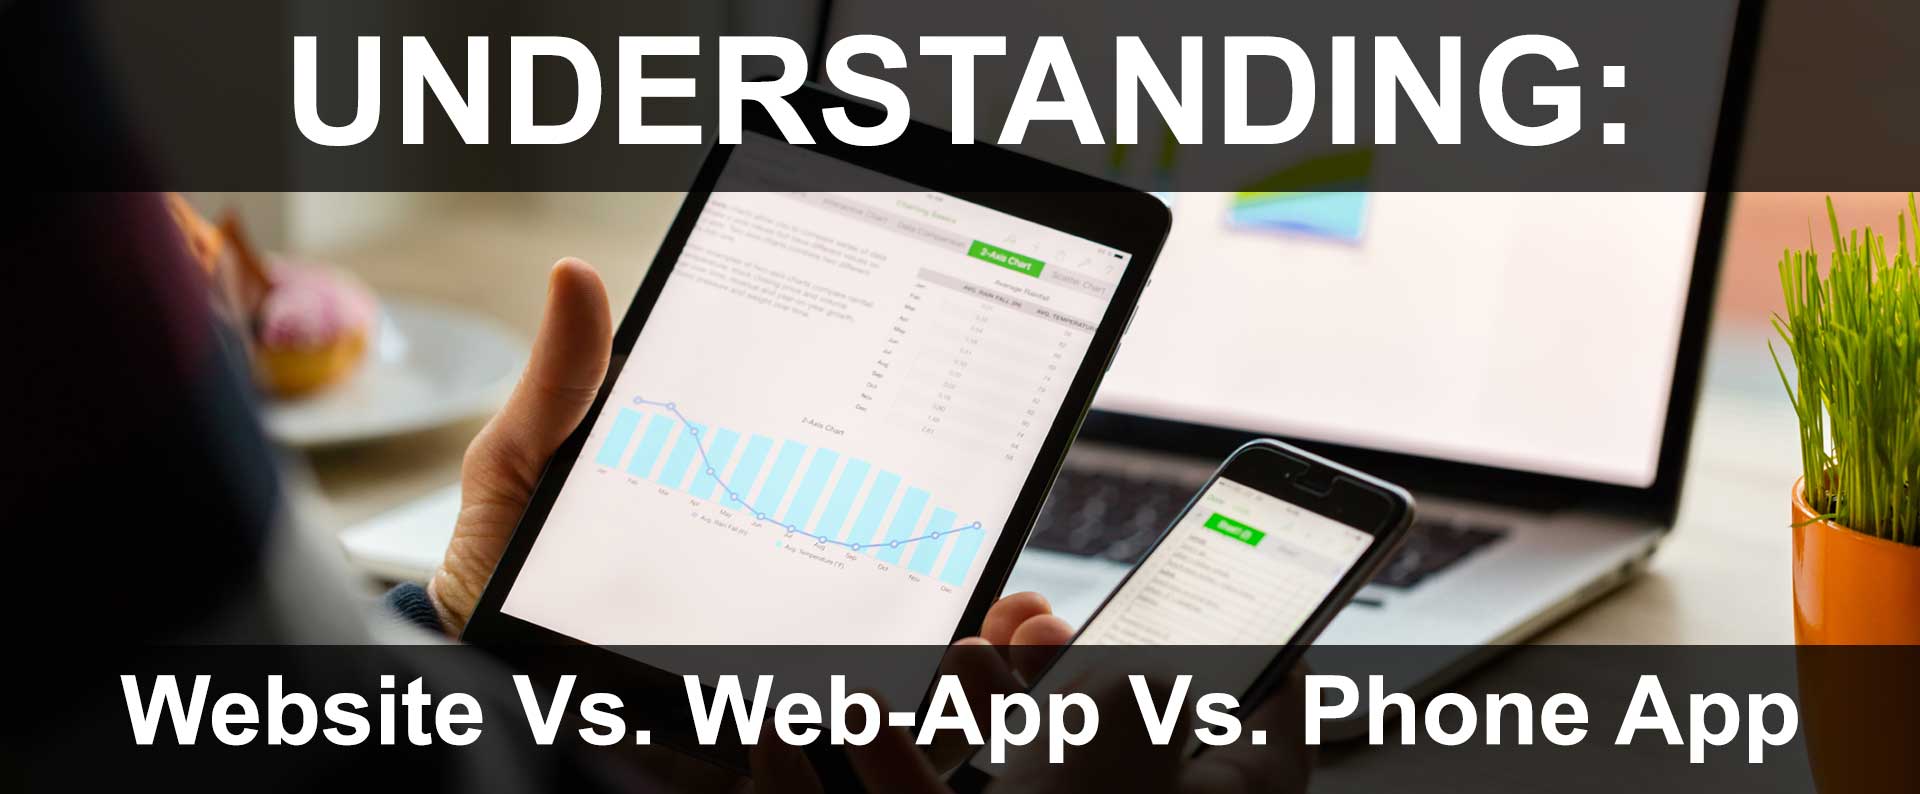 Understanding Web 1.0 - 3.0 vs. App Technology & What It Means To You